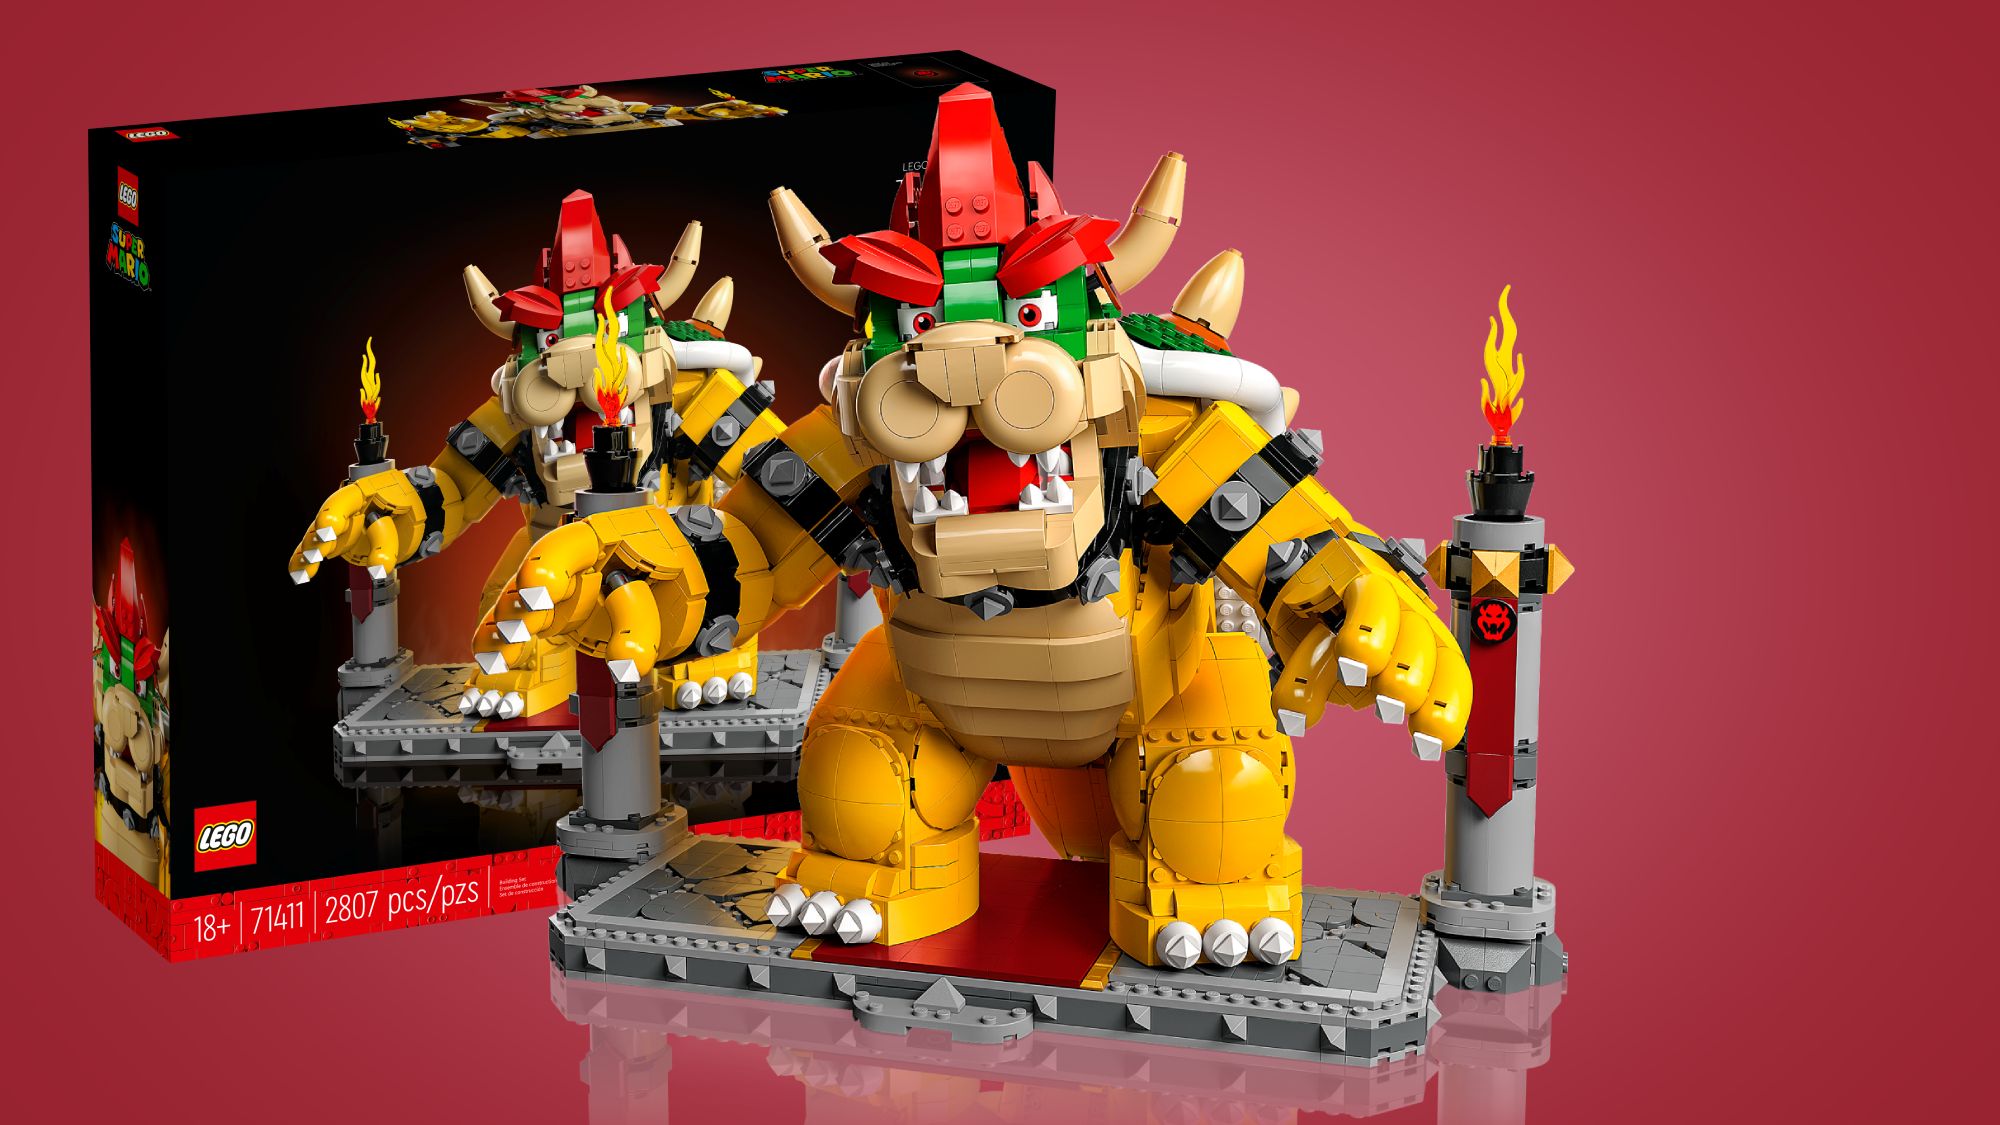 Prime Day has me dipping into my savings for this Lego Bowser